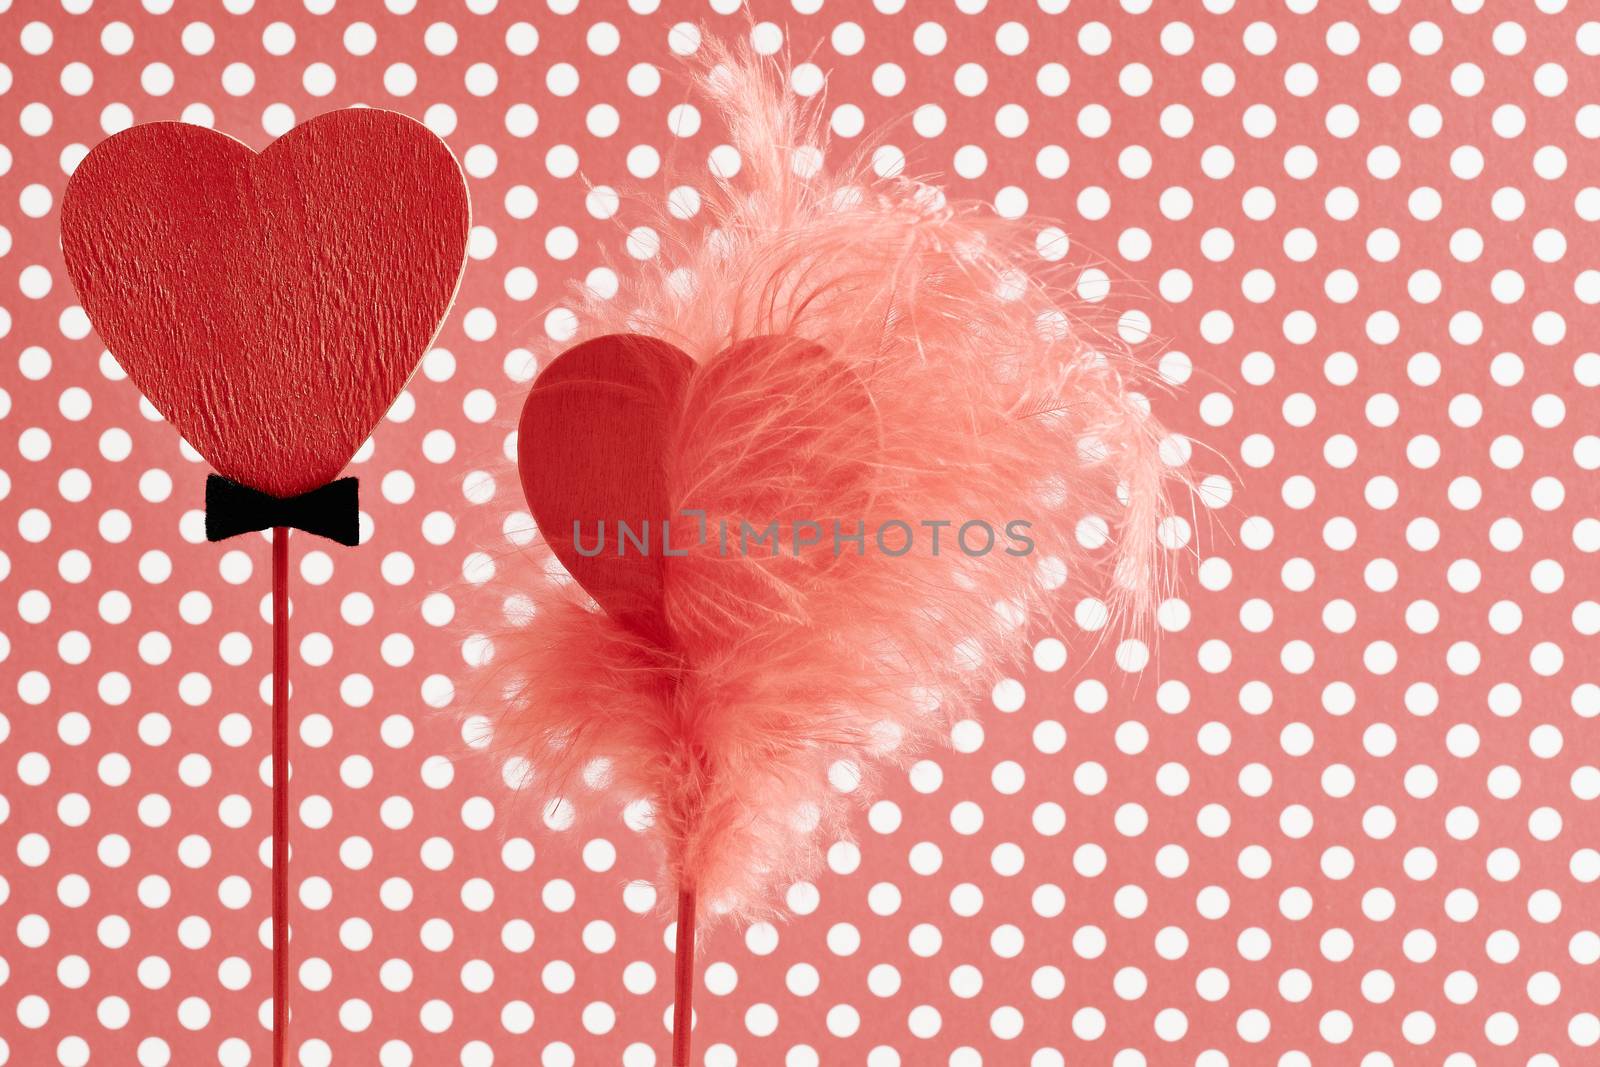 Love hearts , Valentines Day. Hearts couple made of red wood, Vintage romantic style on polka dots background. Stylish elegance decoration with feather. Retro unusual greeting card, toned, copyspace